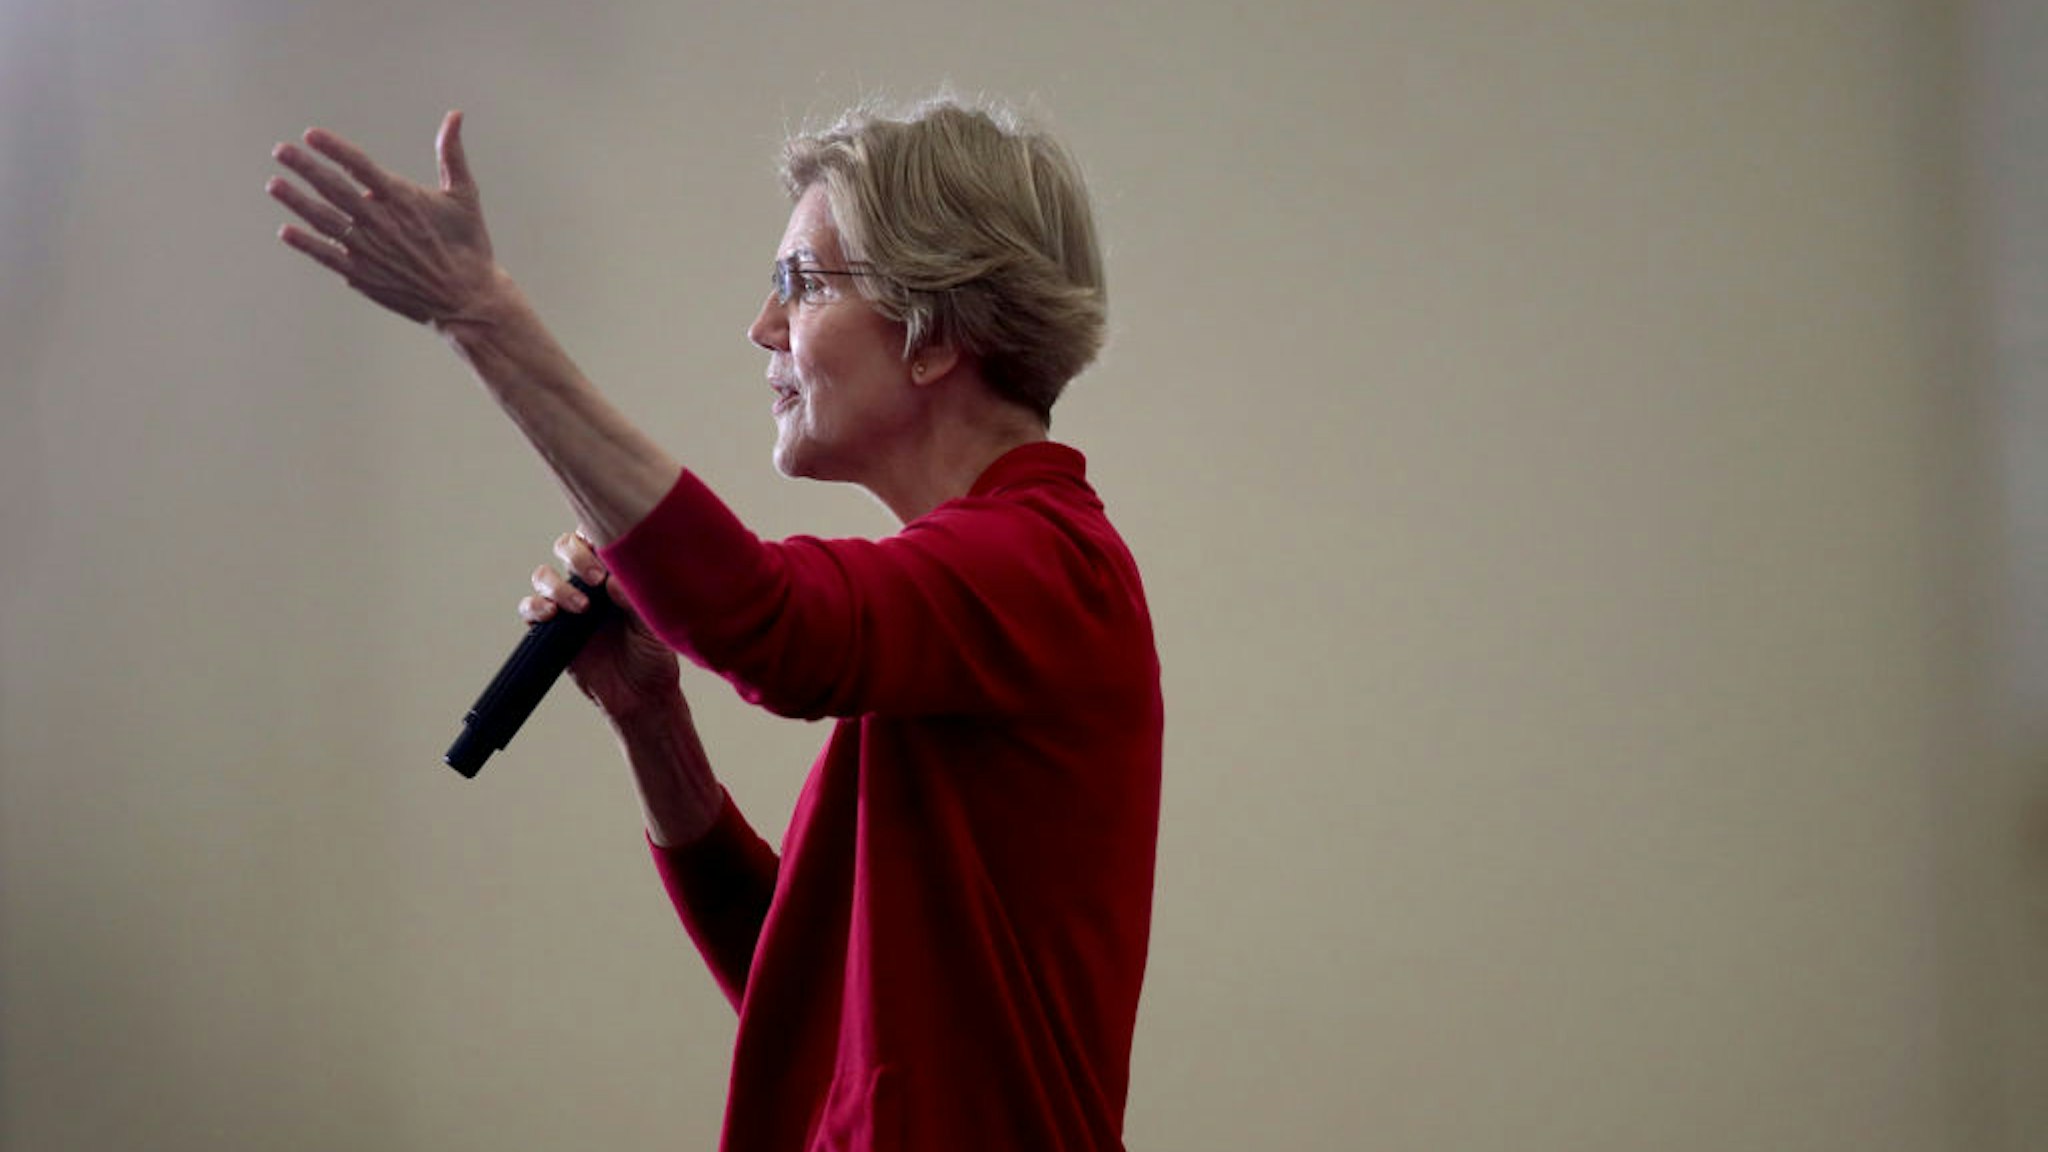 Democratic presidential candidate Sen. Elizabeth Warren (D-MA) speaks to guests during a campaign stop at Hempstead High School on November 02, 2019 in Dubuque, Iowa. The 2020 Iowa Democratic caucuses will take place on February 3, 2020, making it the first nominating contest for the Democratic Party in choosing their presidential candidate.